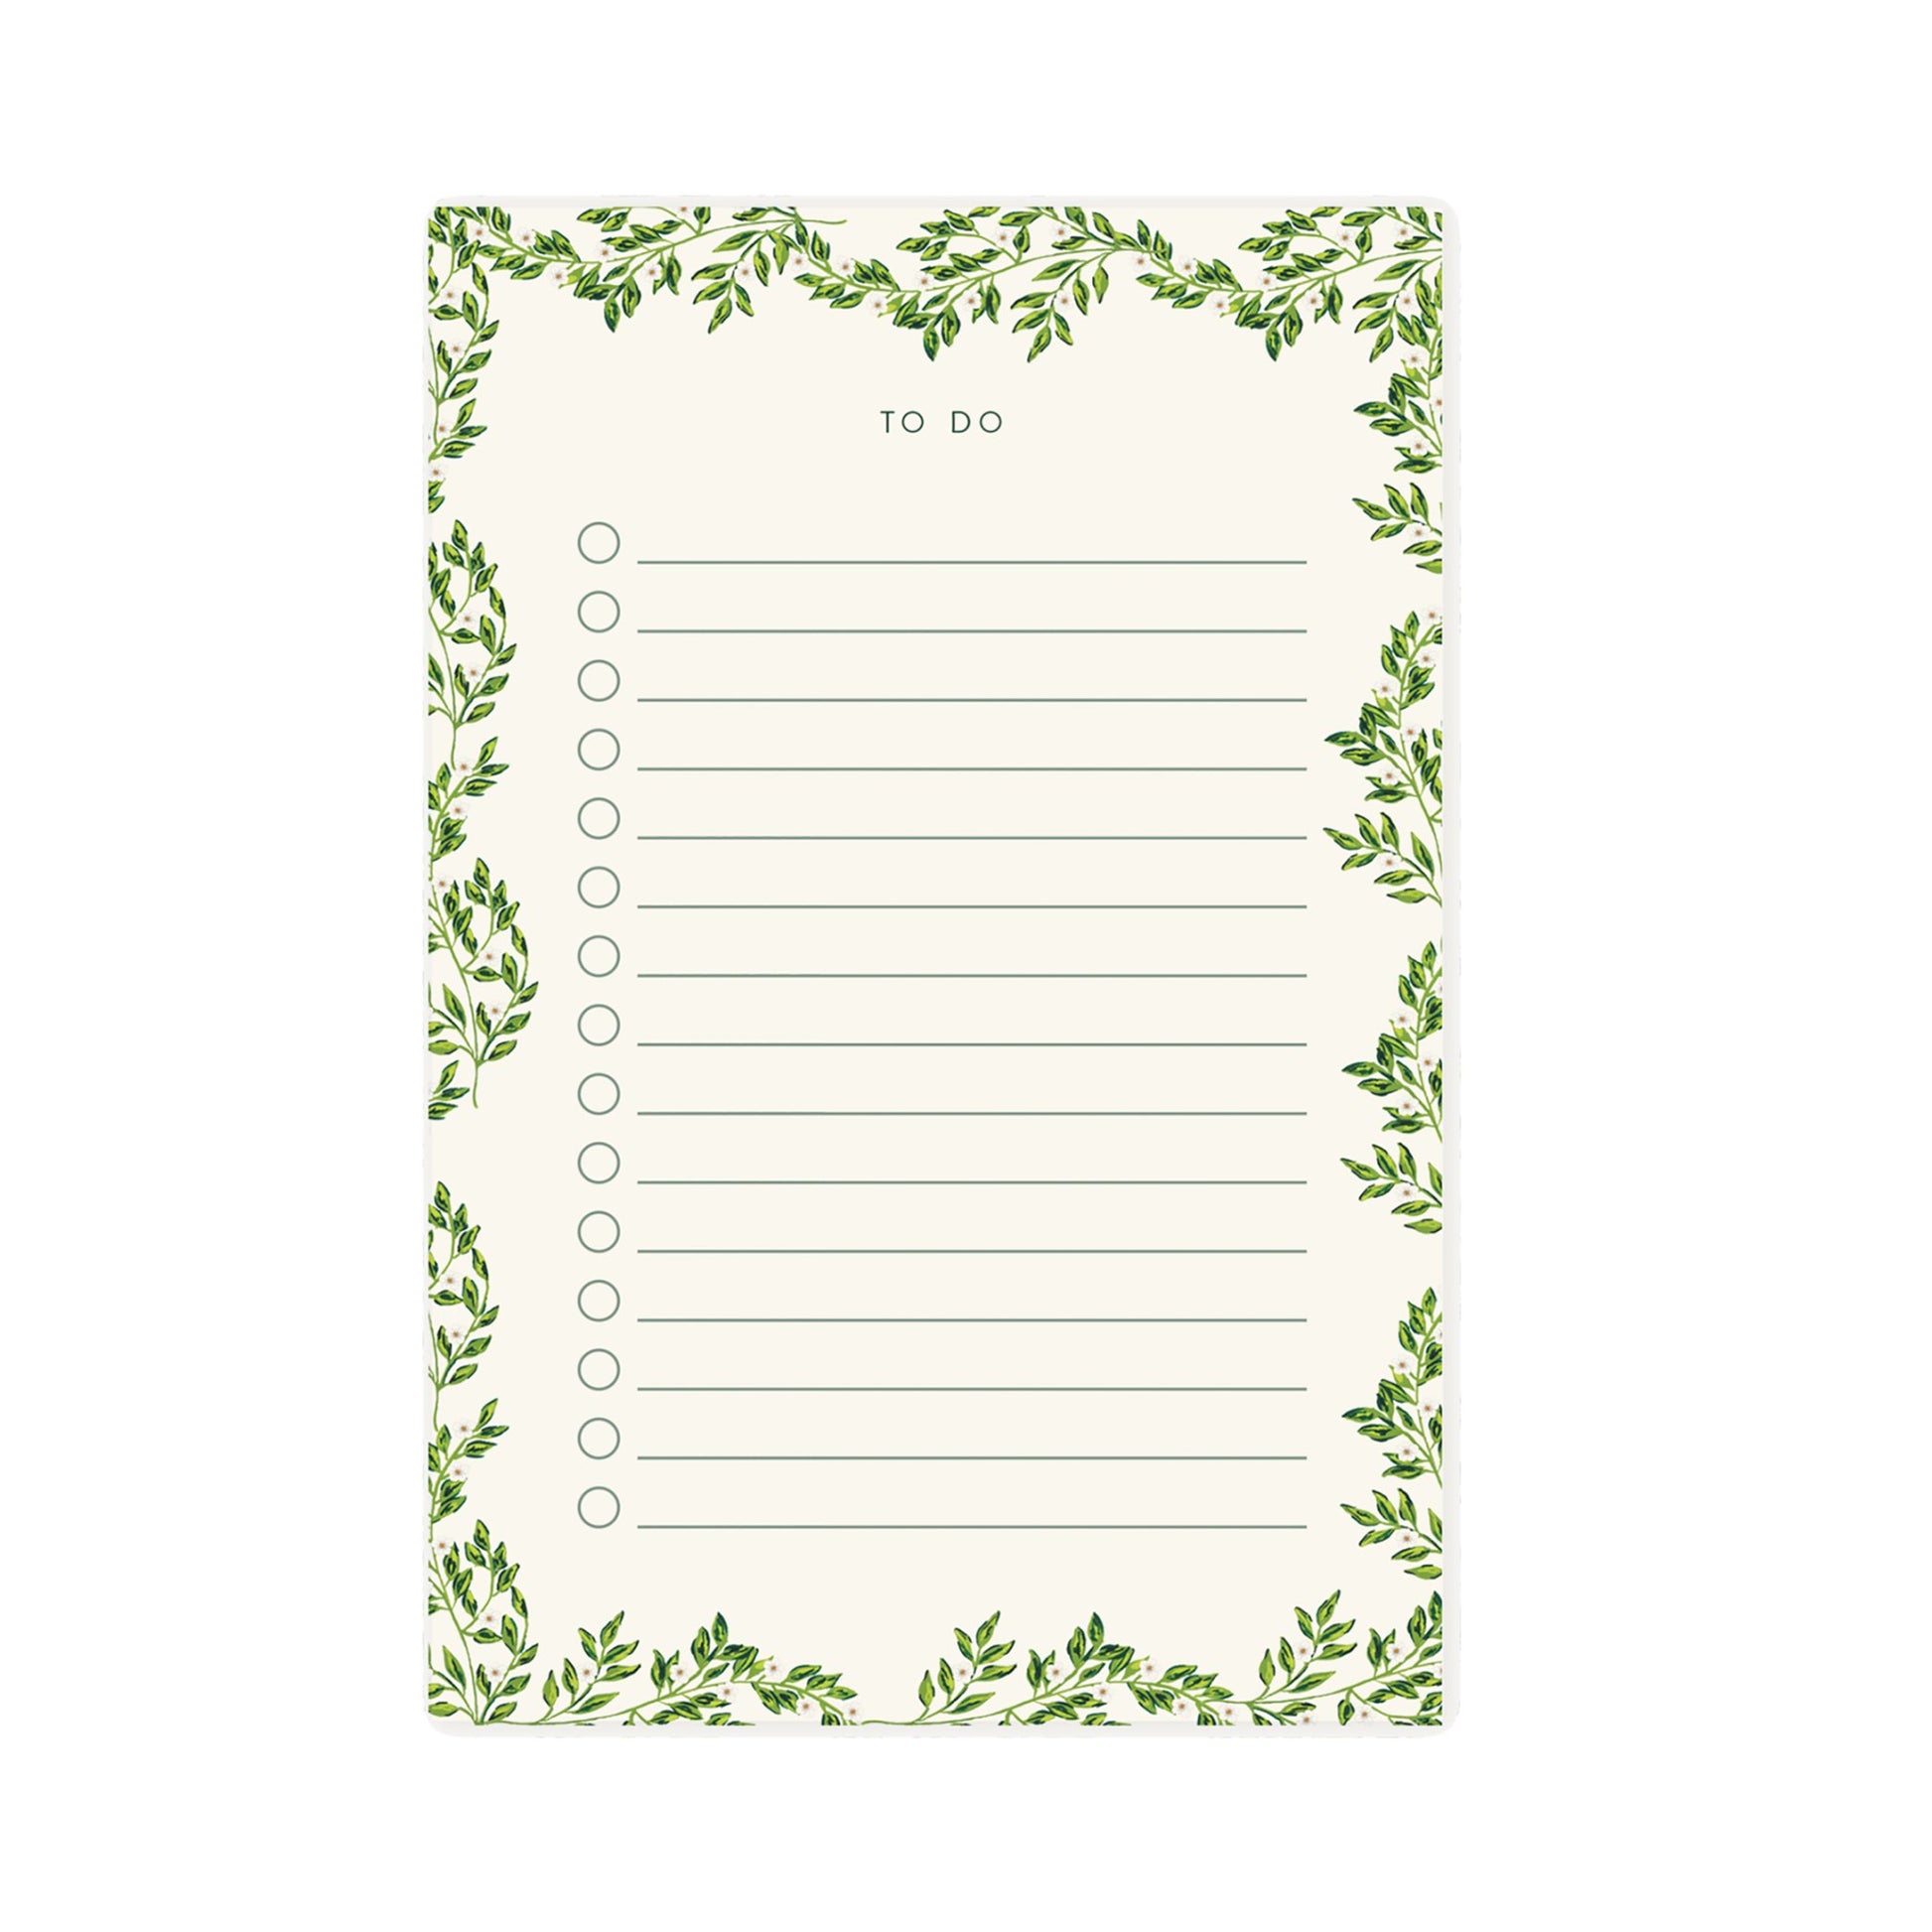 Vines To Do Notepad - oh-eco